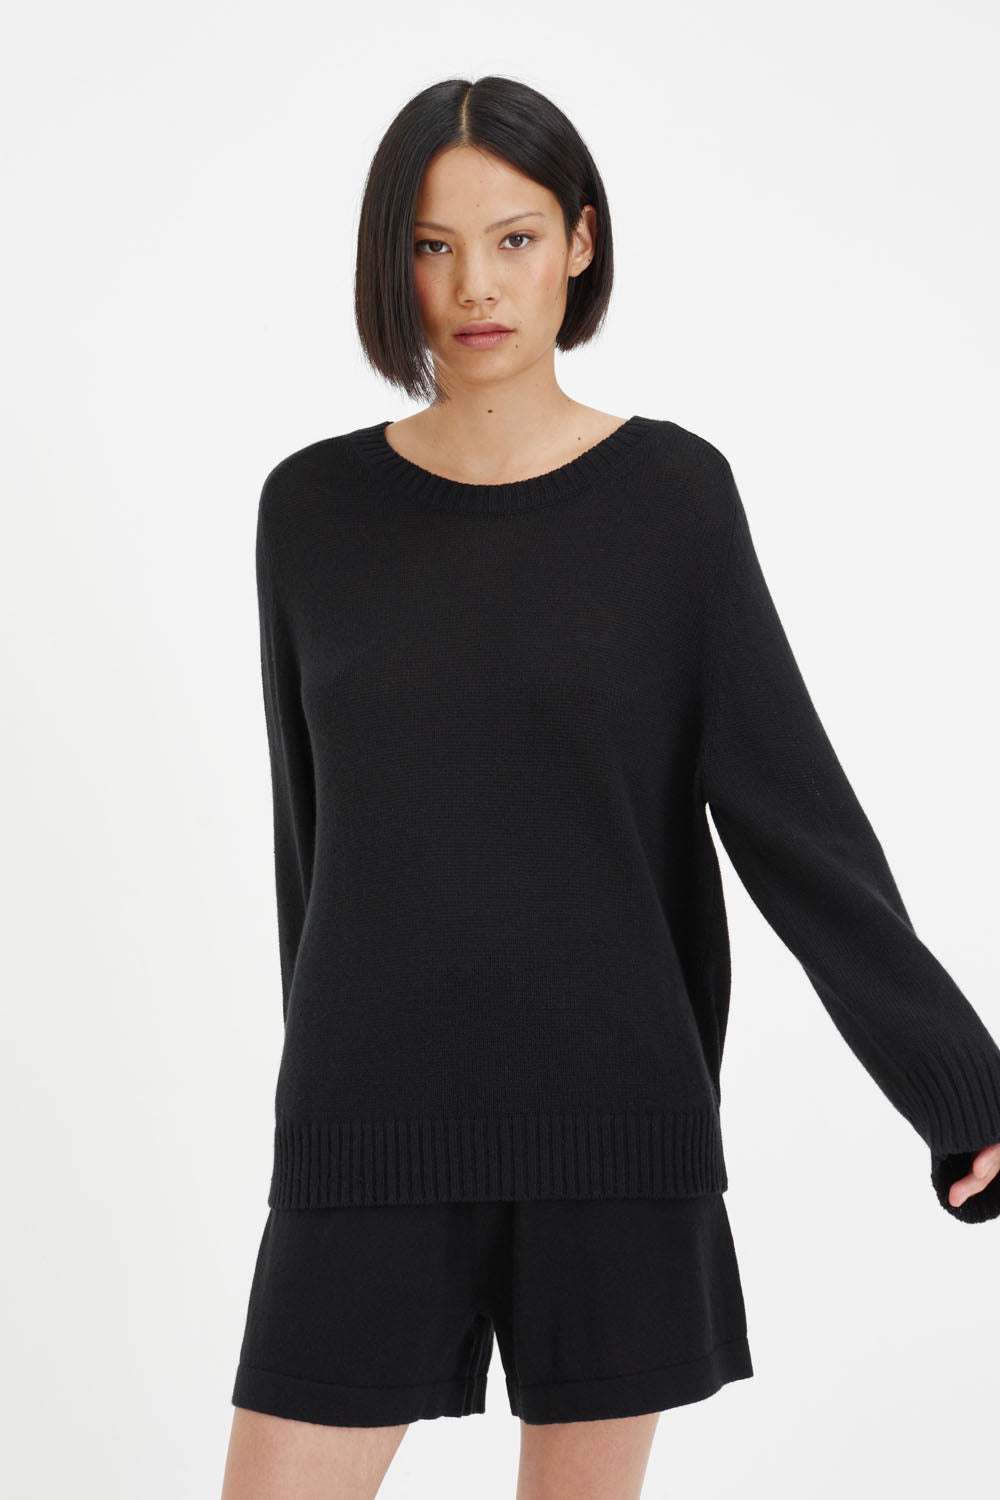 Black Cotton-Cashmere Slouchy Sweater